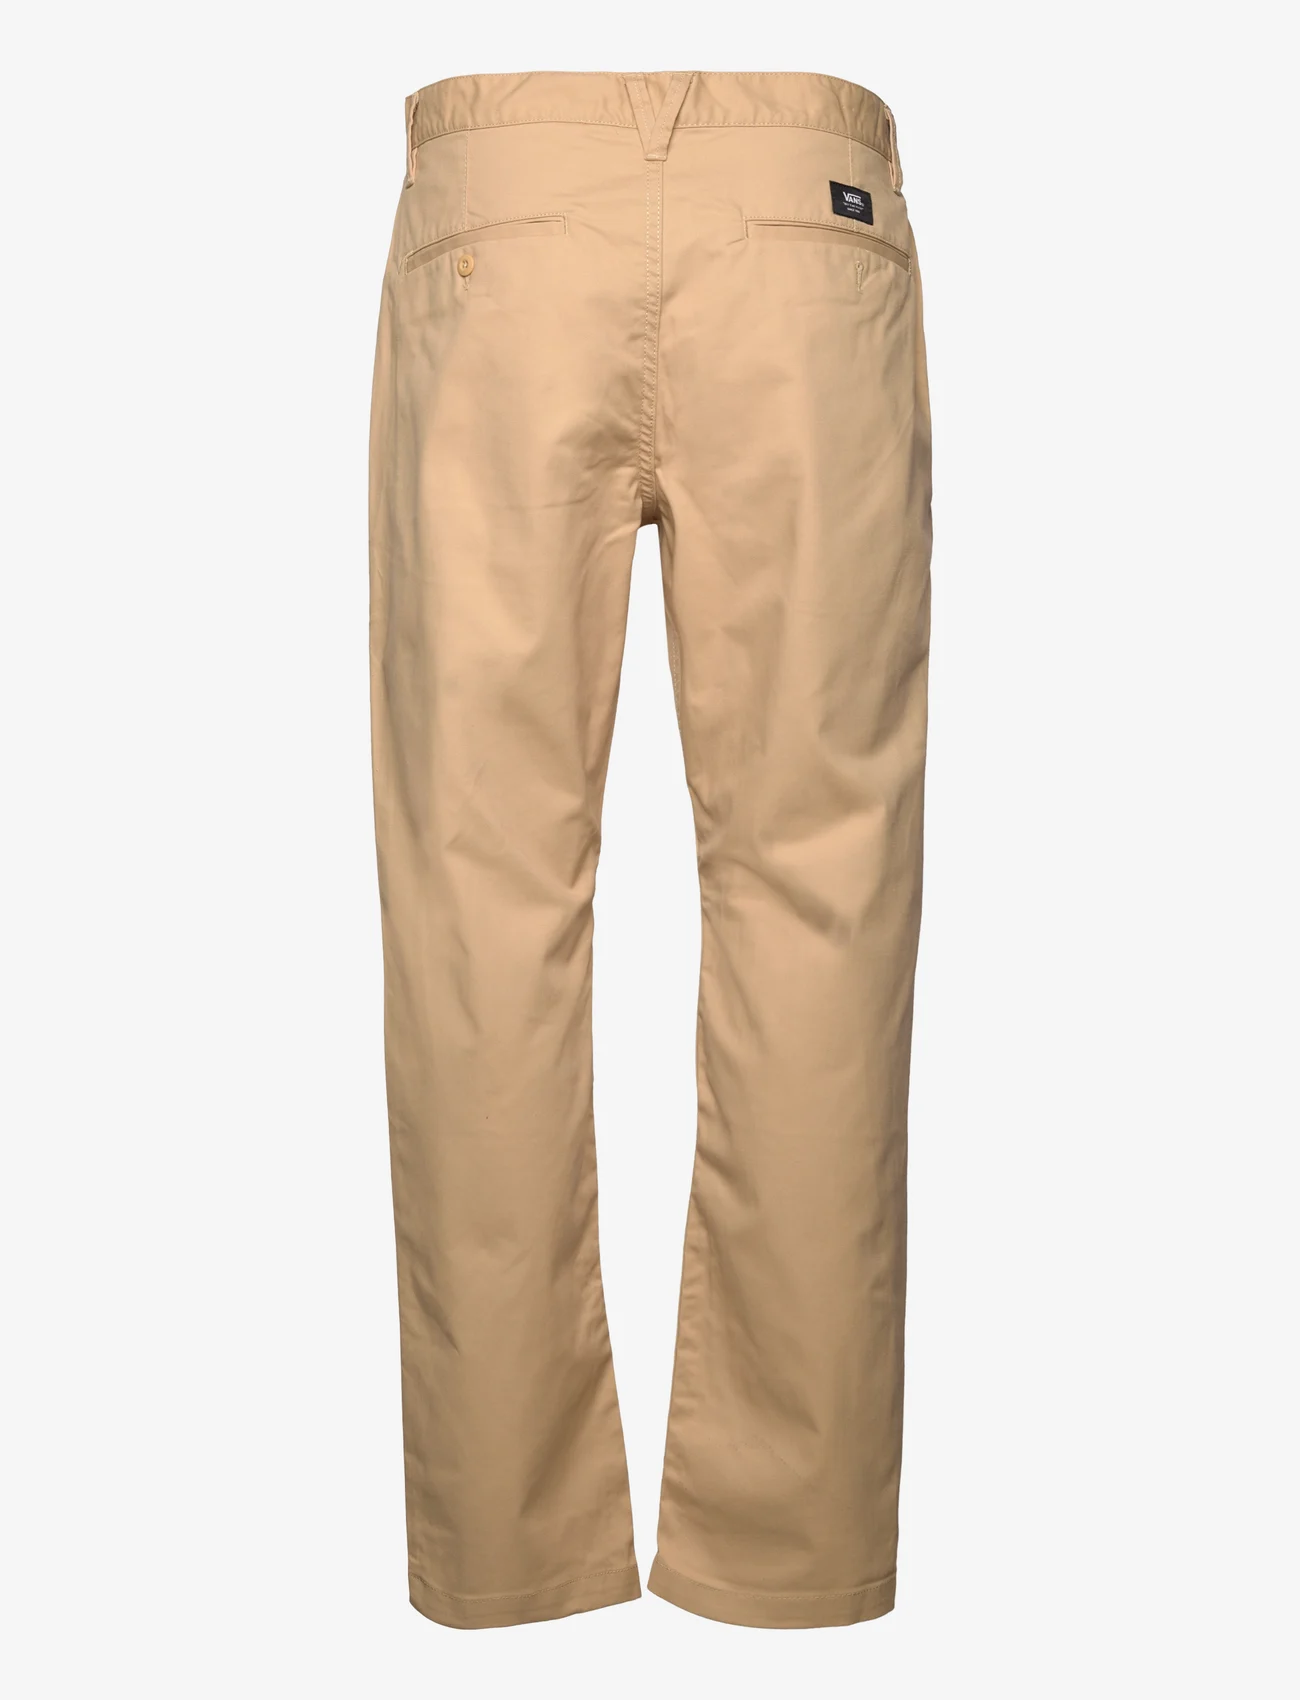 VANS - MN AUTHENTIC CHINO RELAXED PANT - sports pants - taos taupe - 1